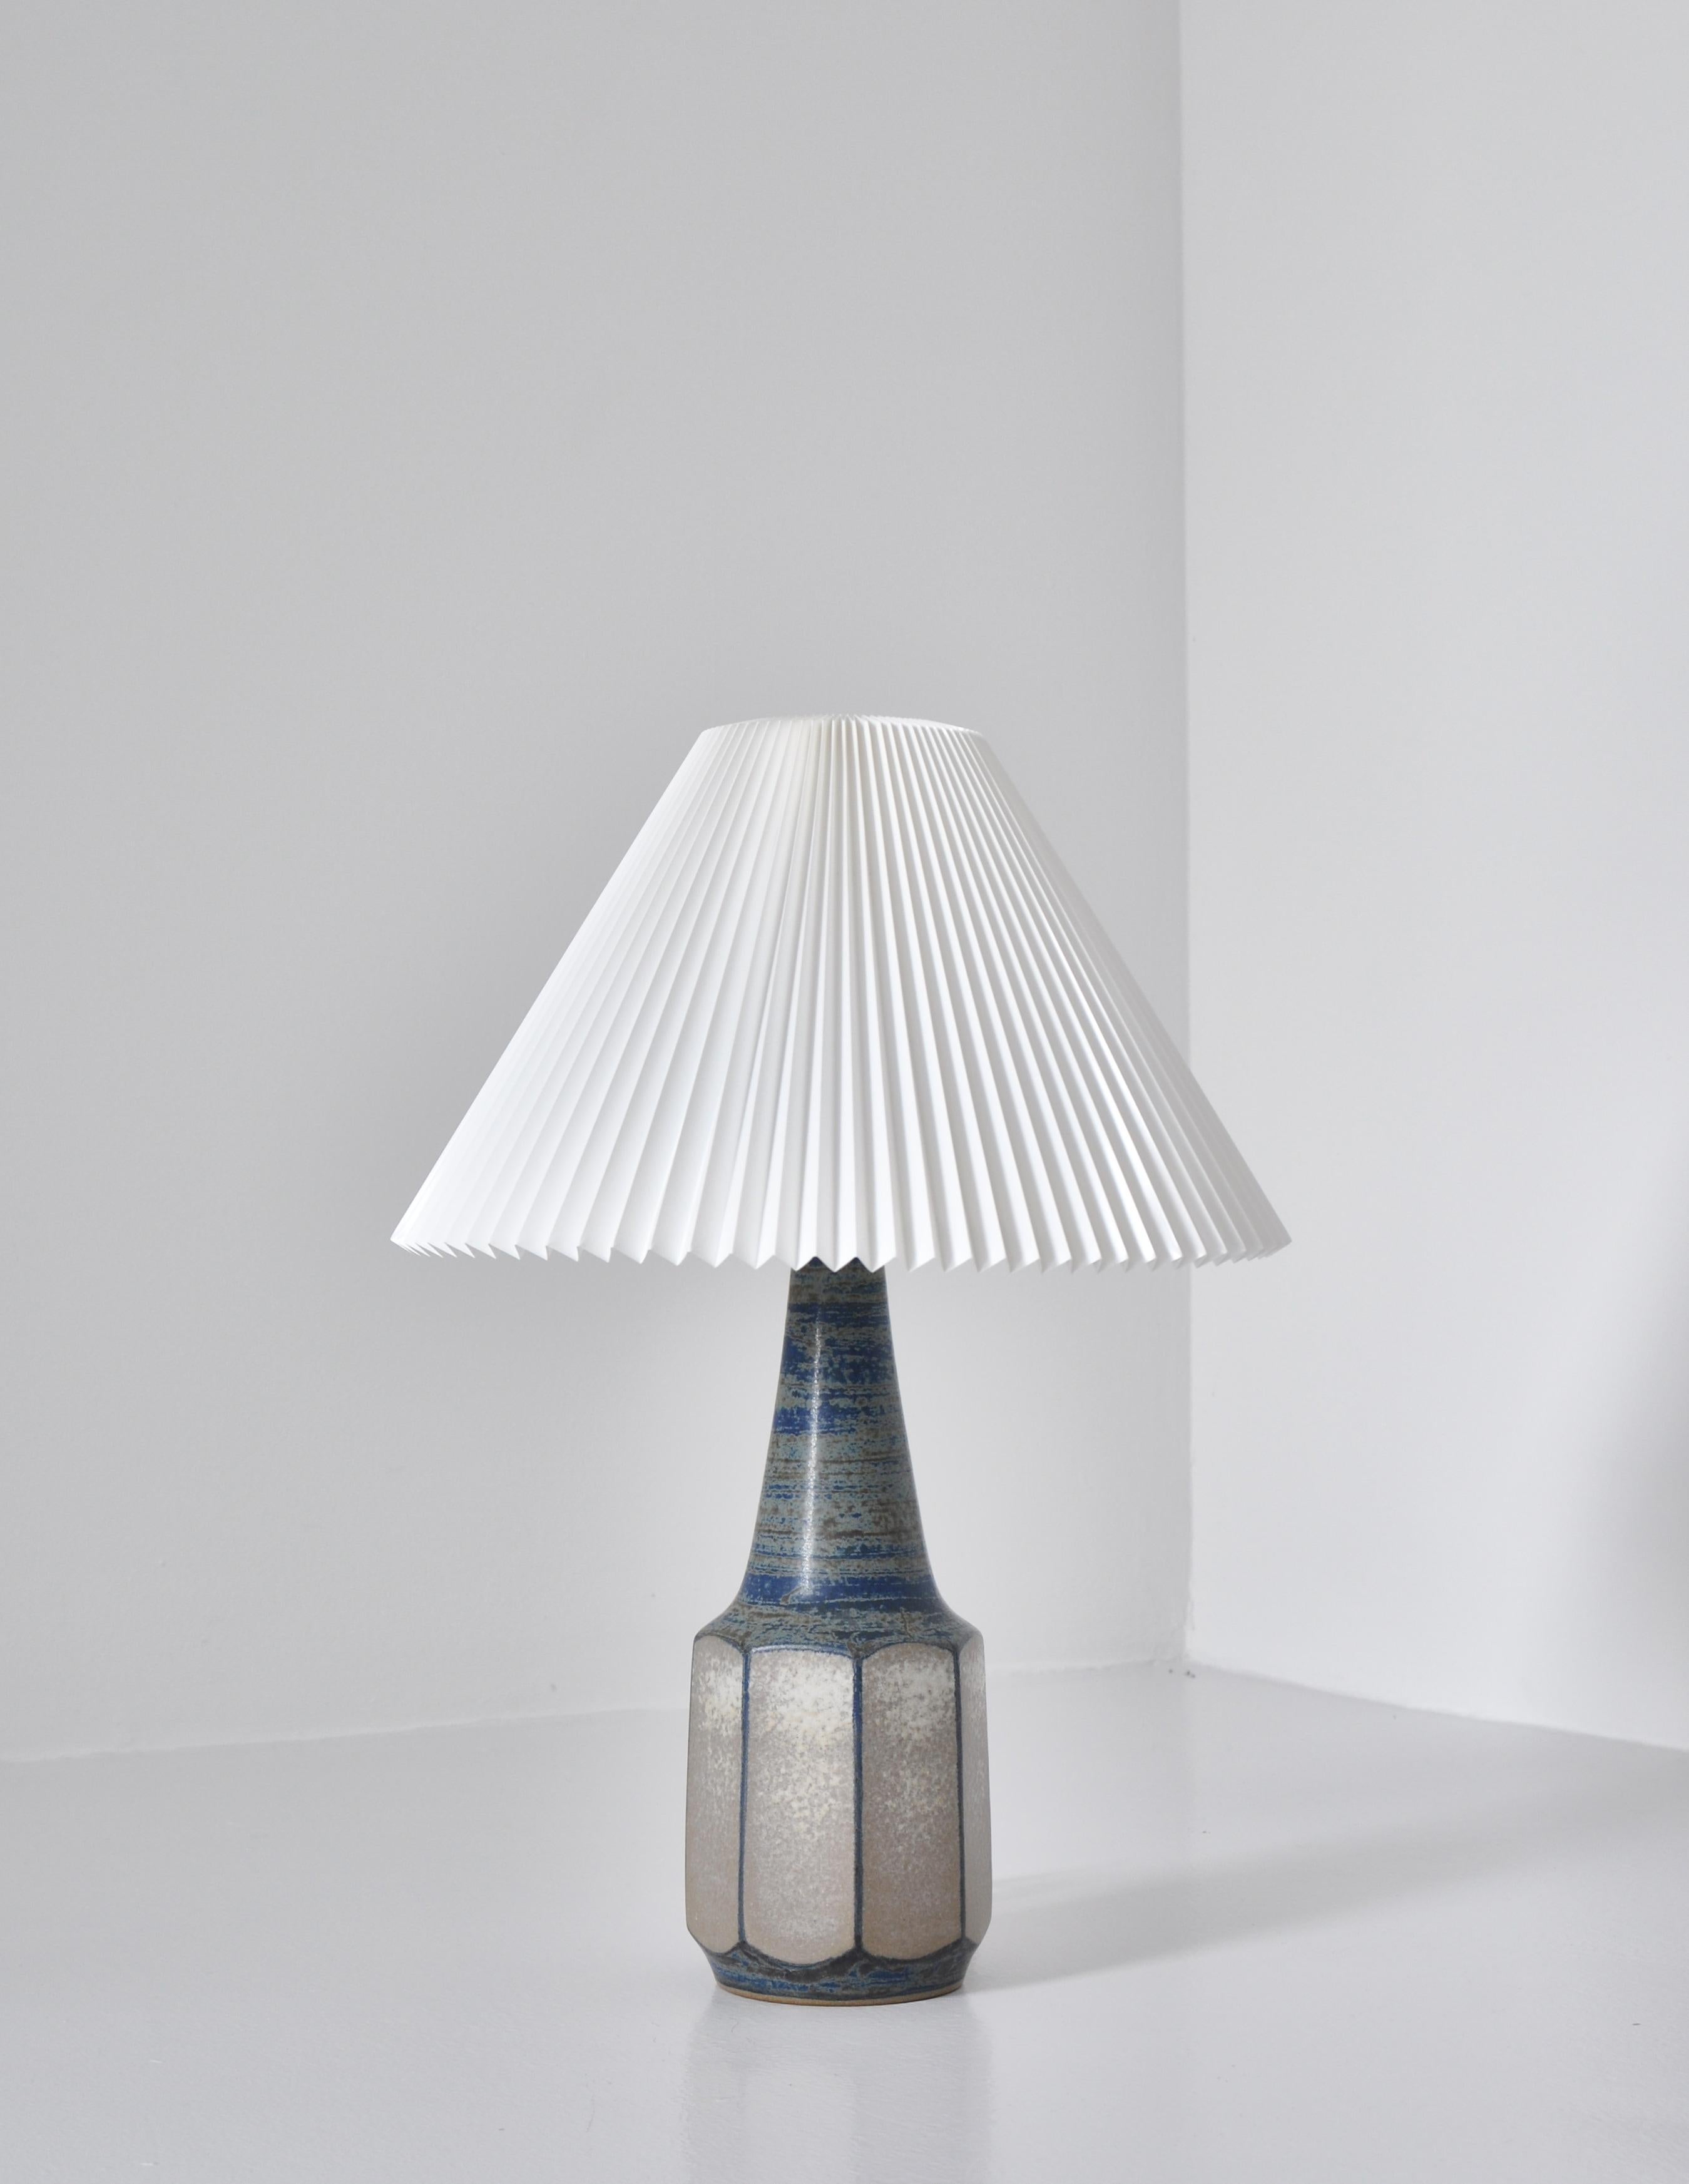 Elegant handmade table lamp made from blue / grey glazed stoneware by Marianne Starck at the workshop of Michael Andersen & Sons, Denmark in the 1960s. The lamp is mounted with a hand folded Le Klint shade. Great condition with no chips, cracks or